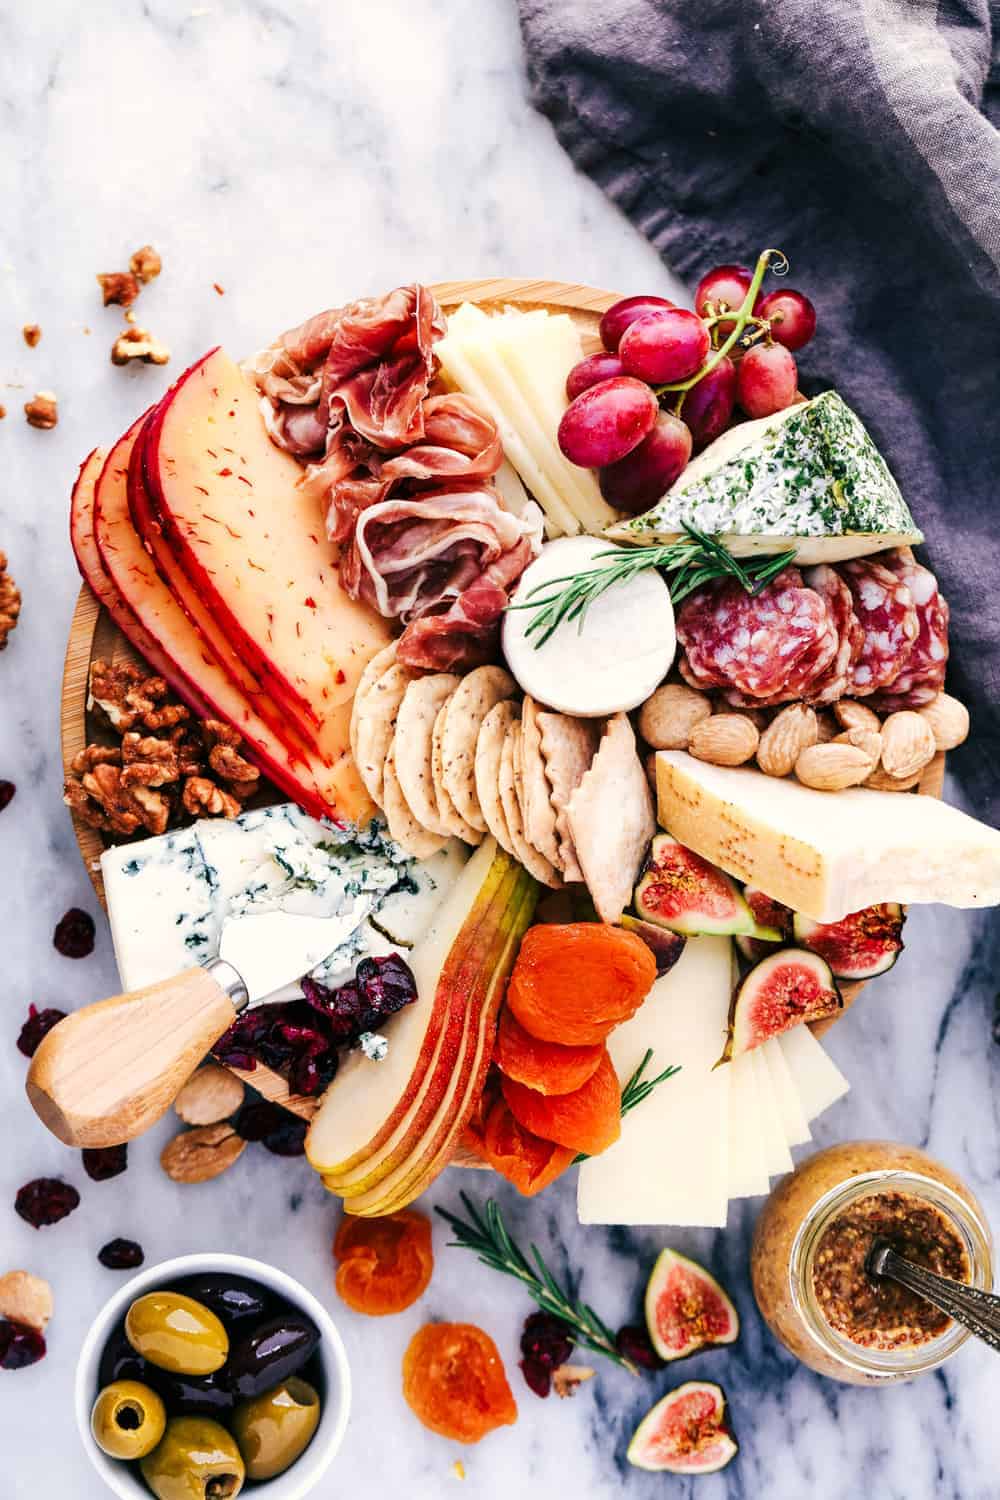 Cheese Board filled with meats, cheeses, nuts, and fruit.